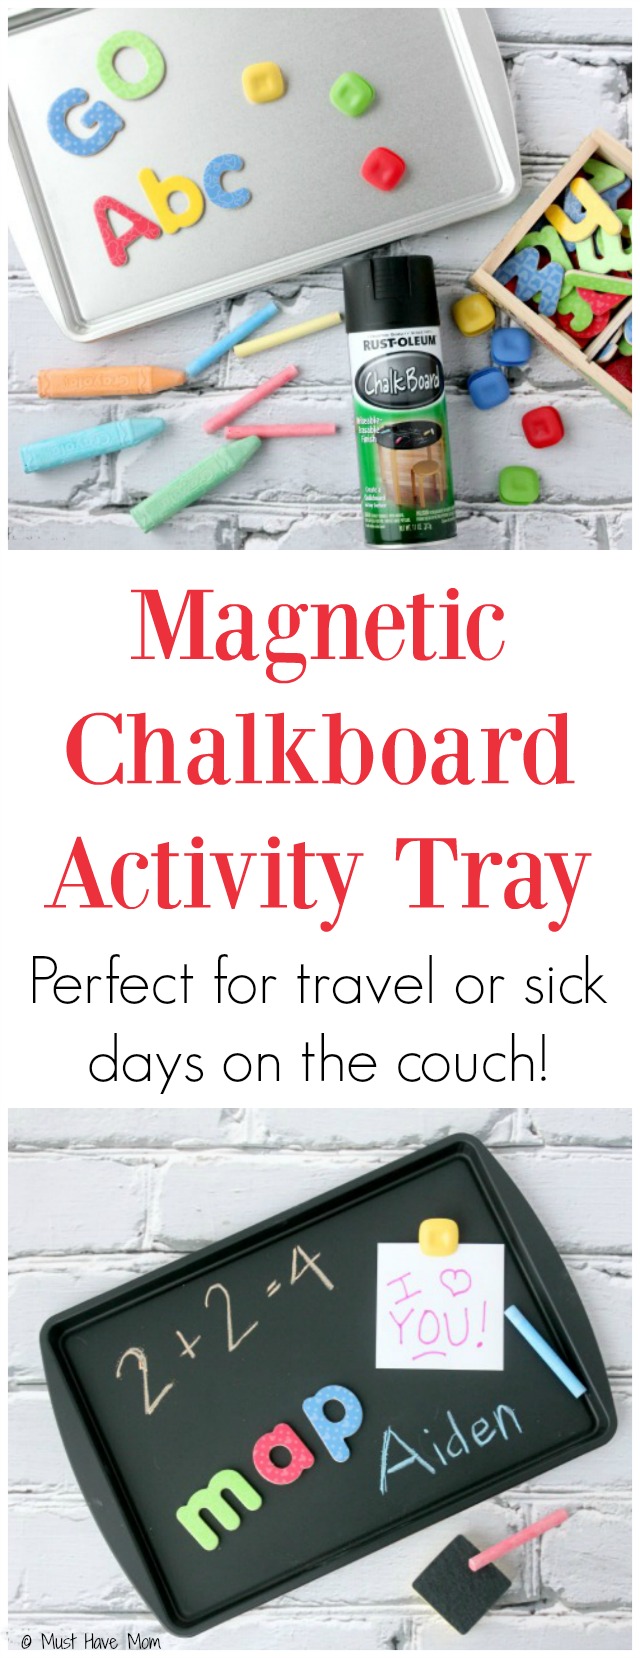 DIY Magnetic Chalkboard Activity Tray. Quick and easy project that is perfect for a travel activity in the car or for sick days on the couch. Great quiet time activity.